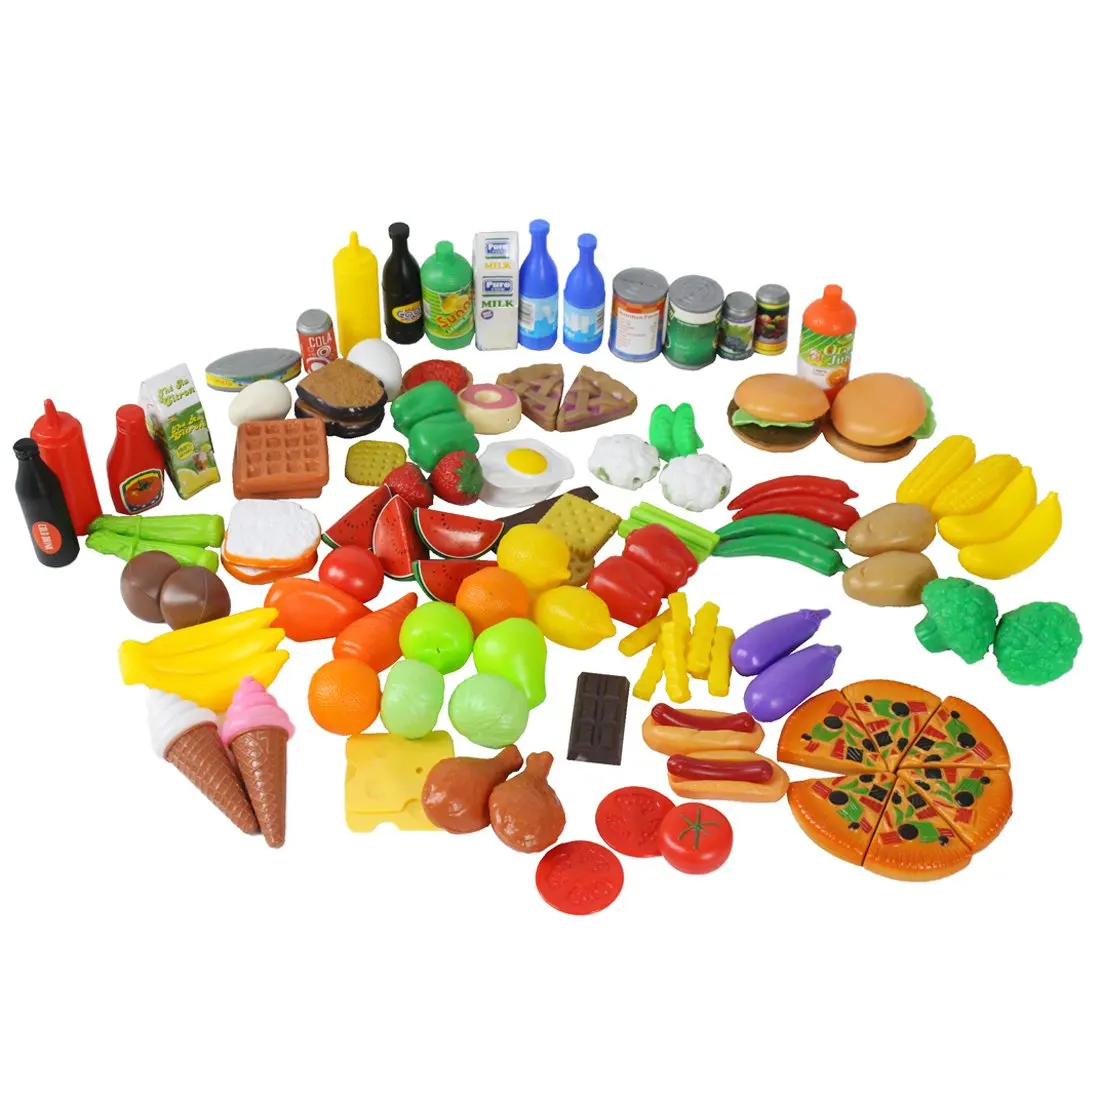 Kitchen Toys Food - New Oven Wooden Toys Food Cooking Simulation Tableware Children Kitchen